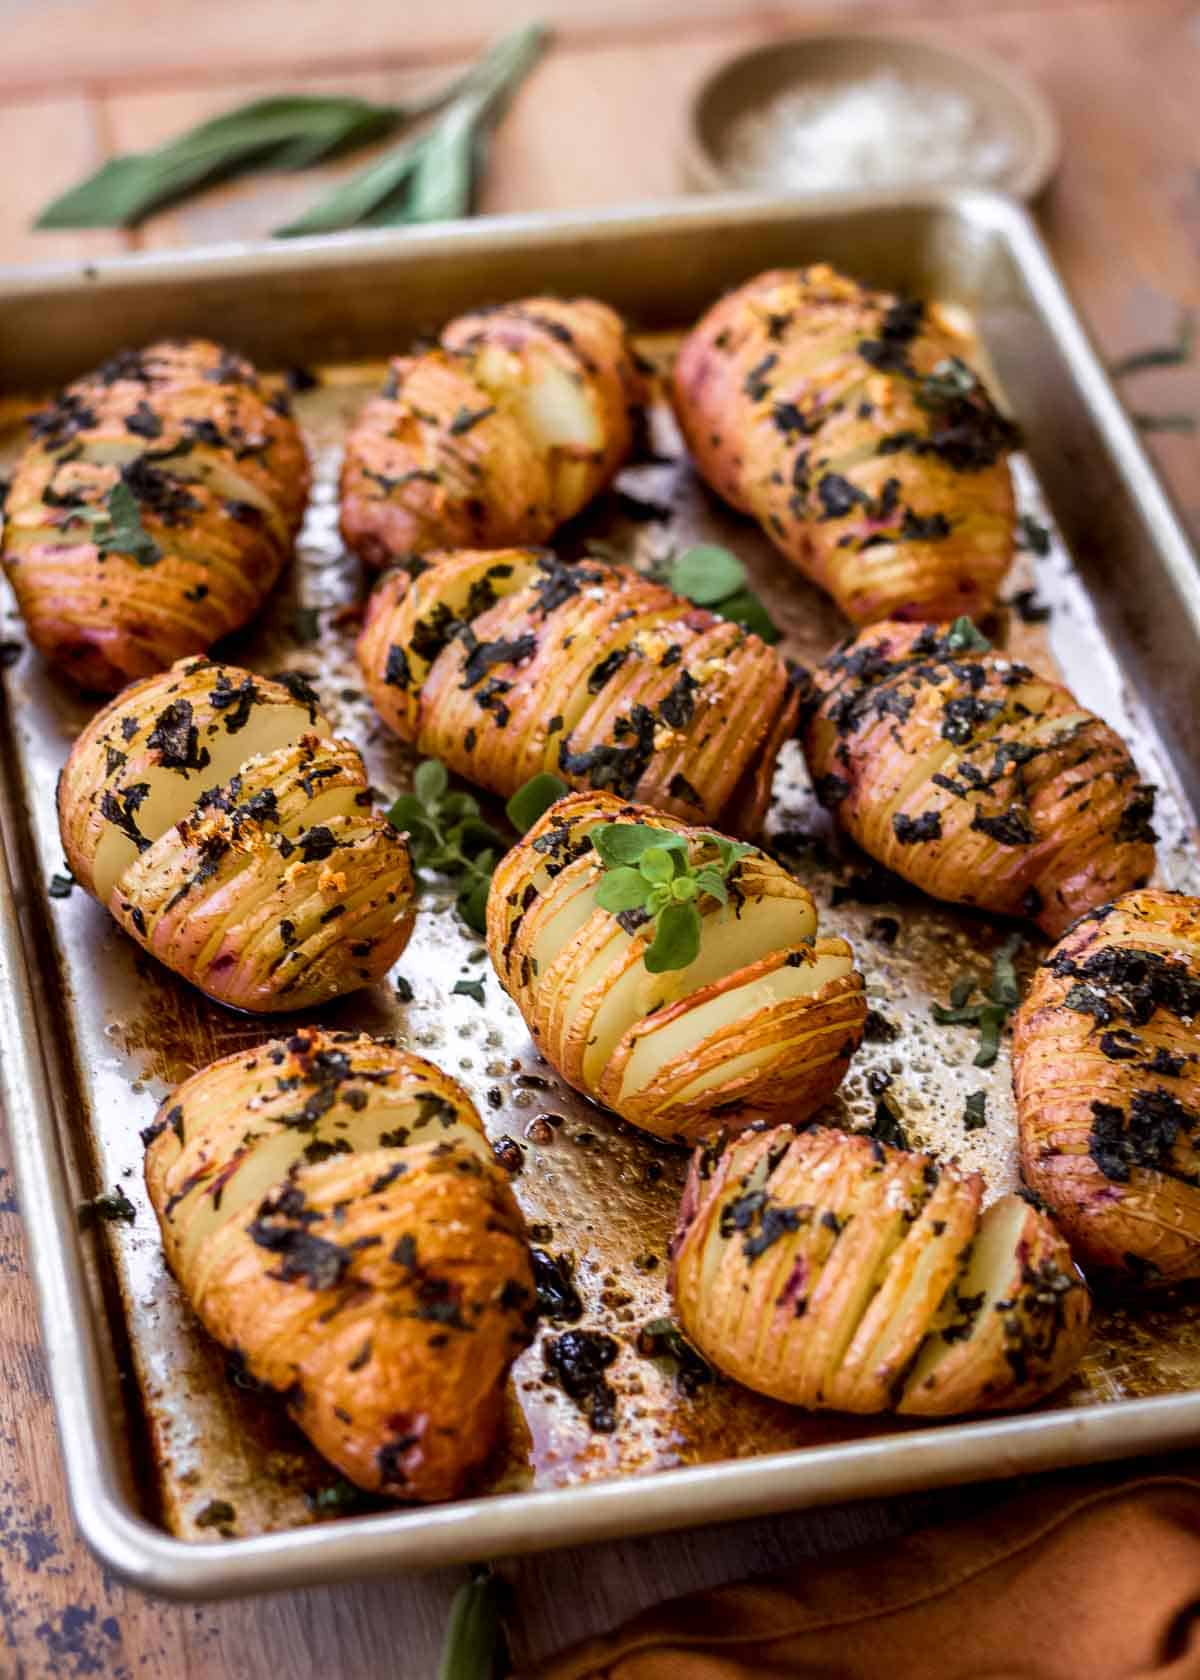 Garlic hasselback potatoes on a silver baking sheet, decorated with fresh herbs and herbs in the background.